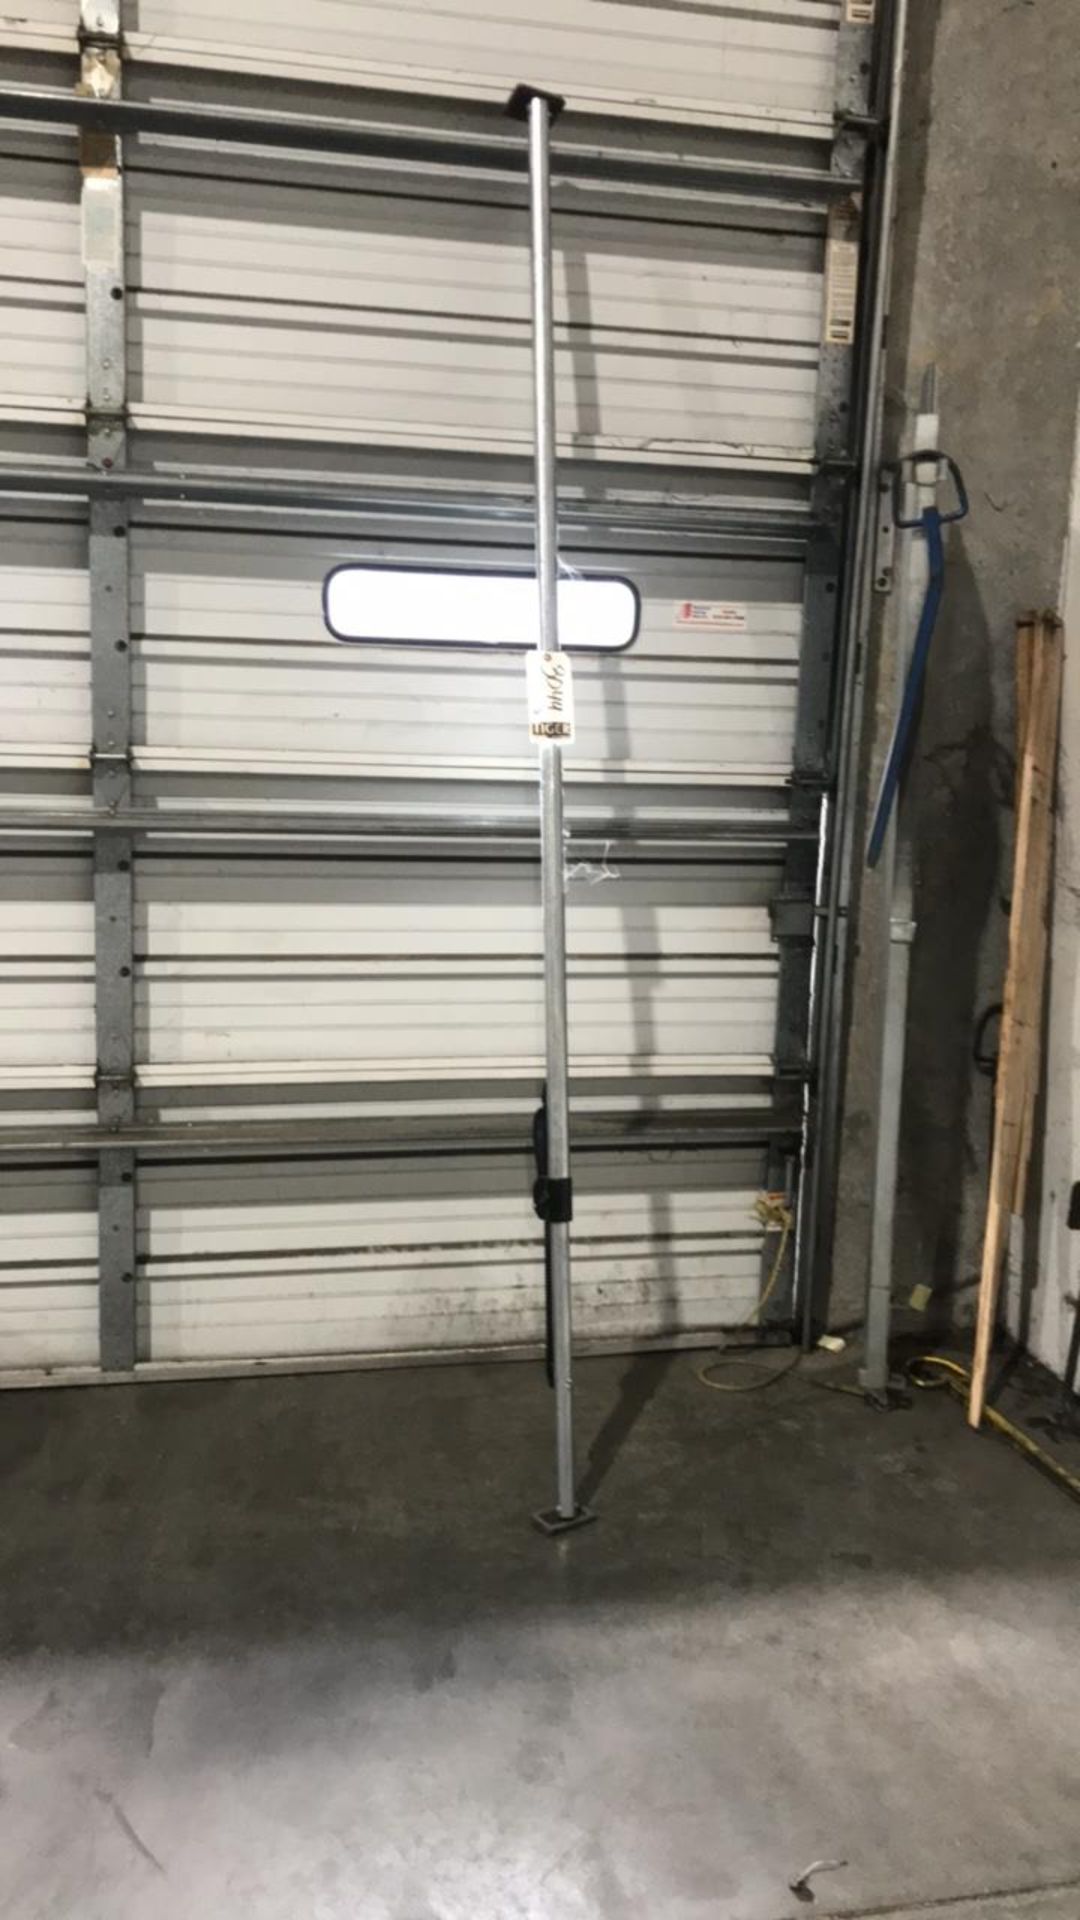 Truck Load Bars - Image 2 of 3